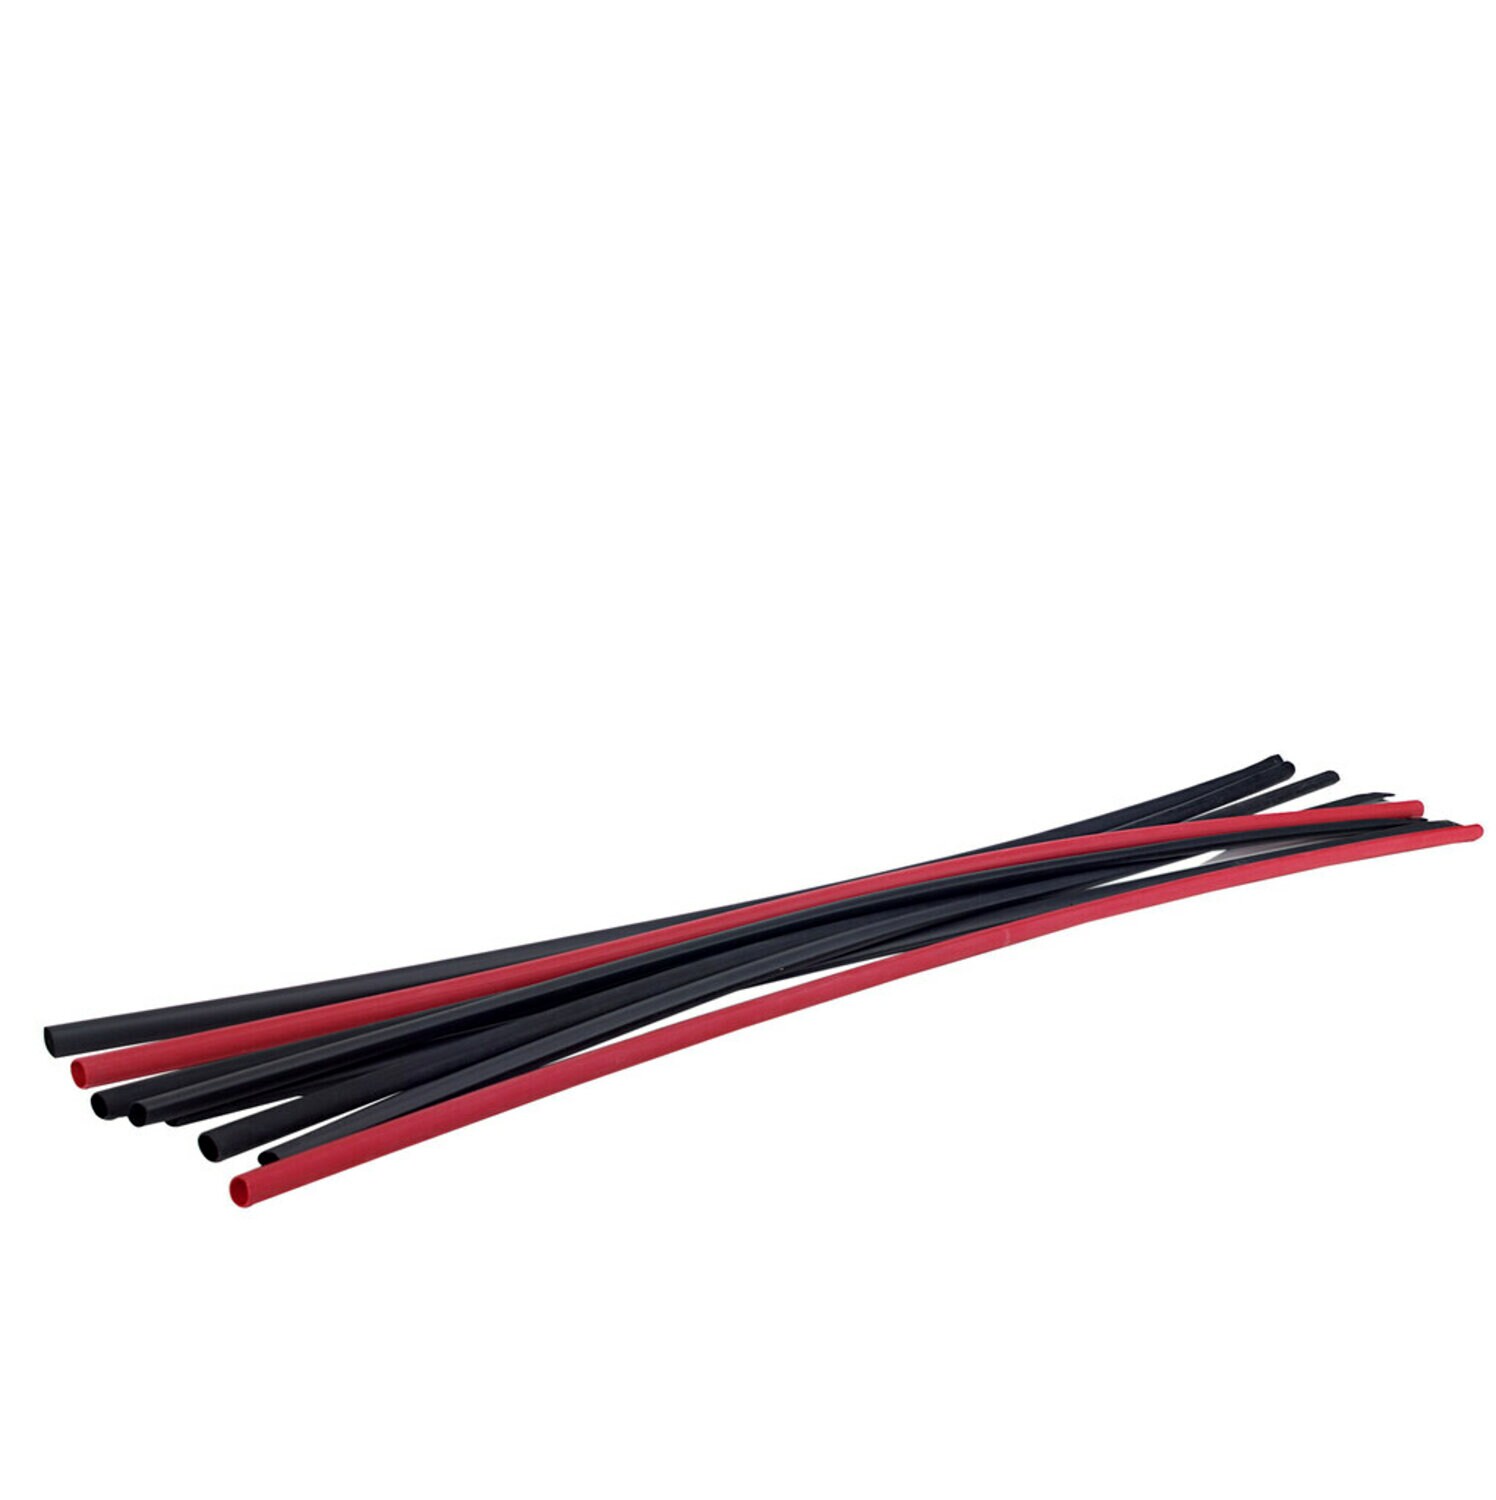 7010350203 - 3M Heat Shrink Thin-Wall Tubing FP-301-1/16-48"-Red-250 Pcs, 48 in
Length sticks, 250 pieces/case